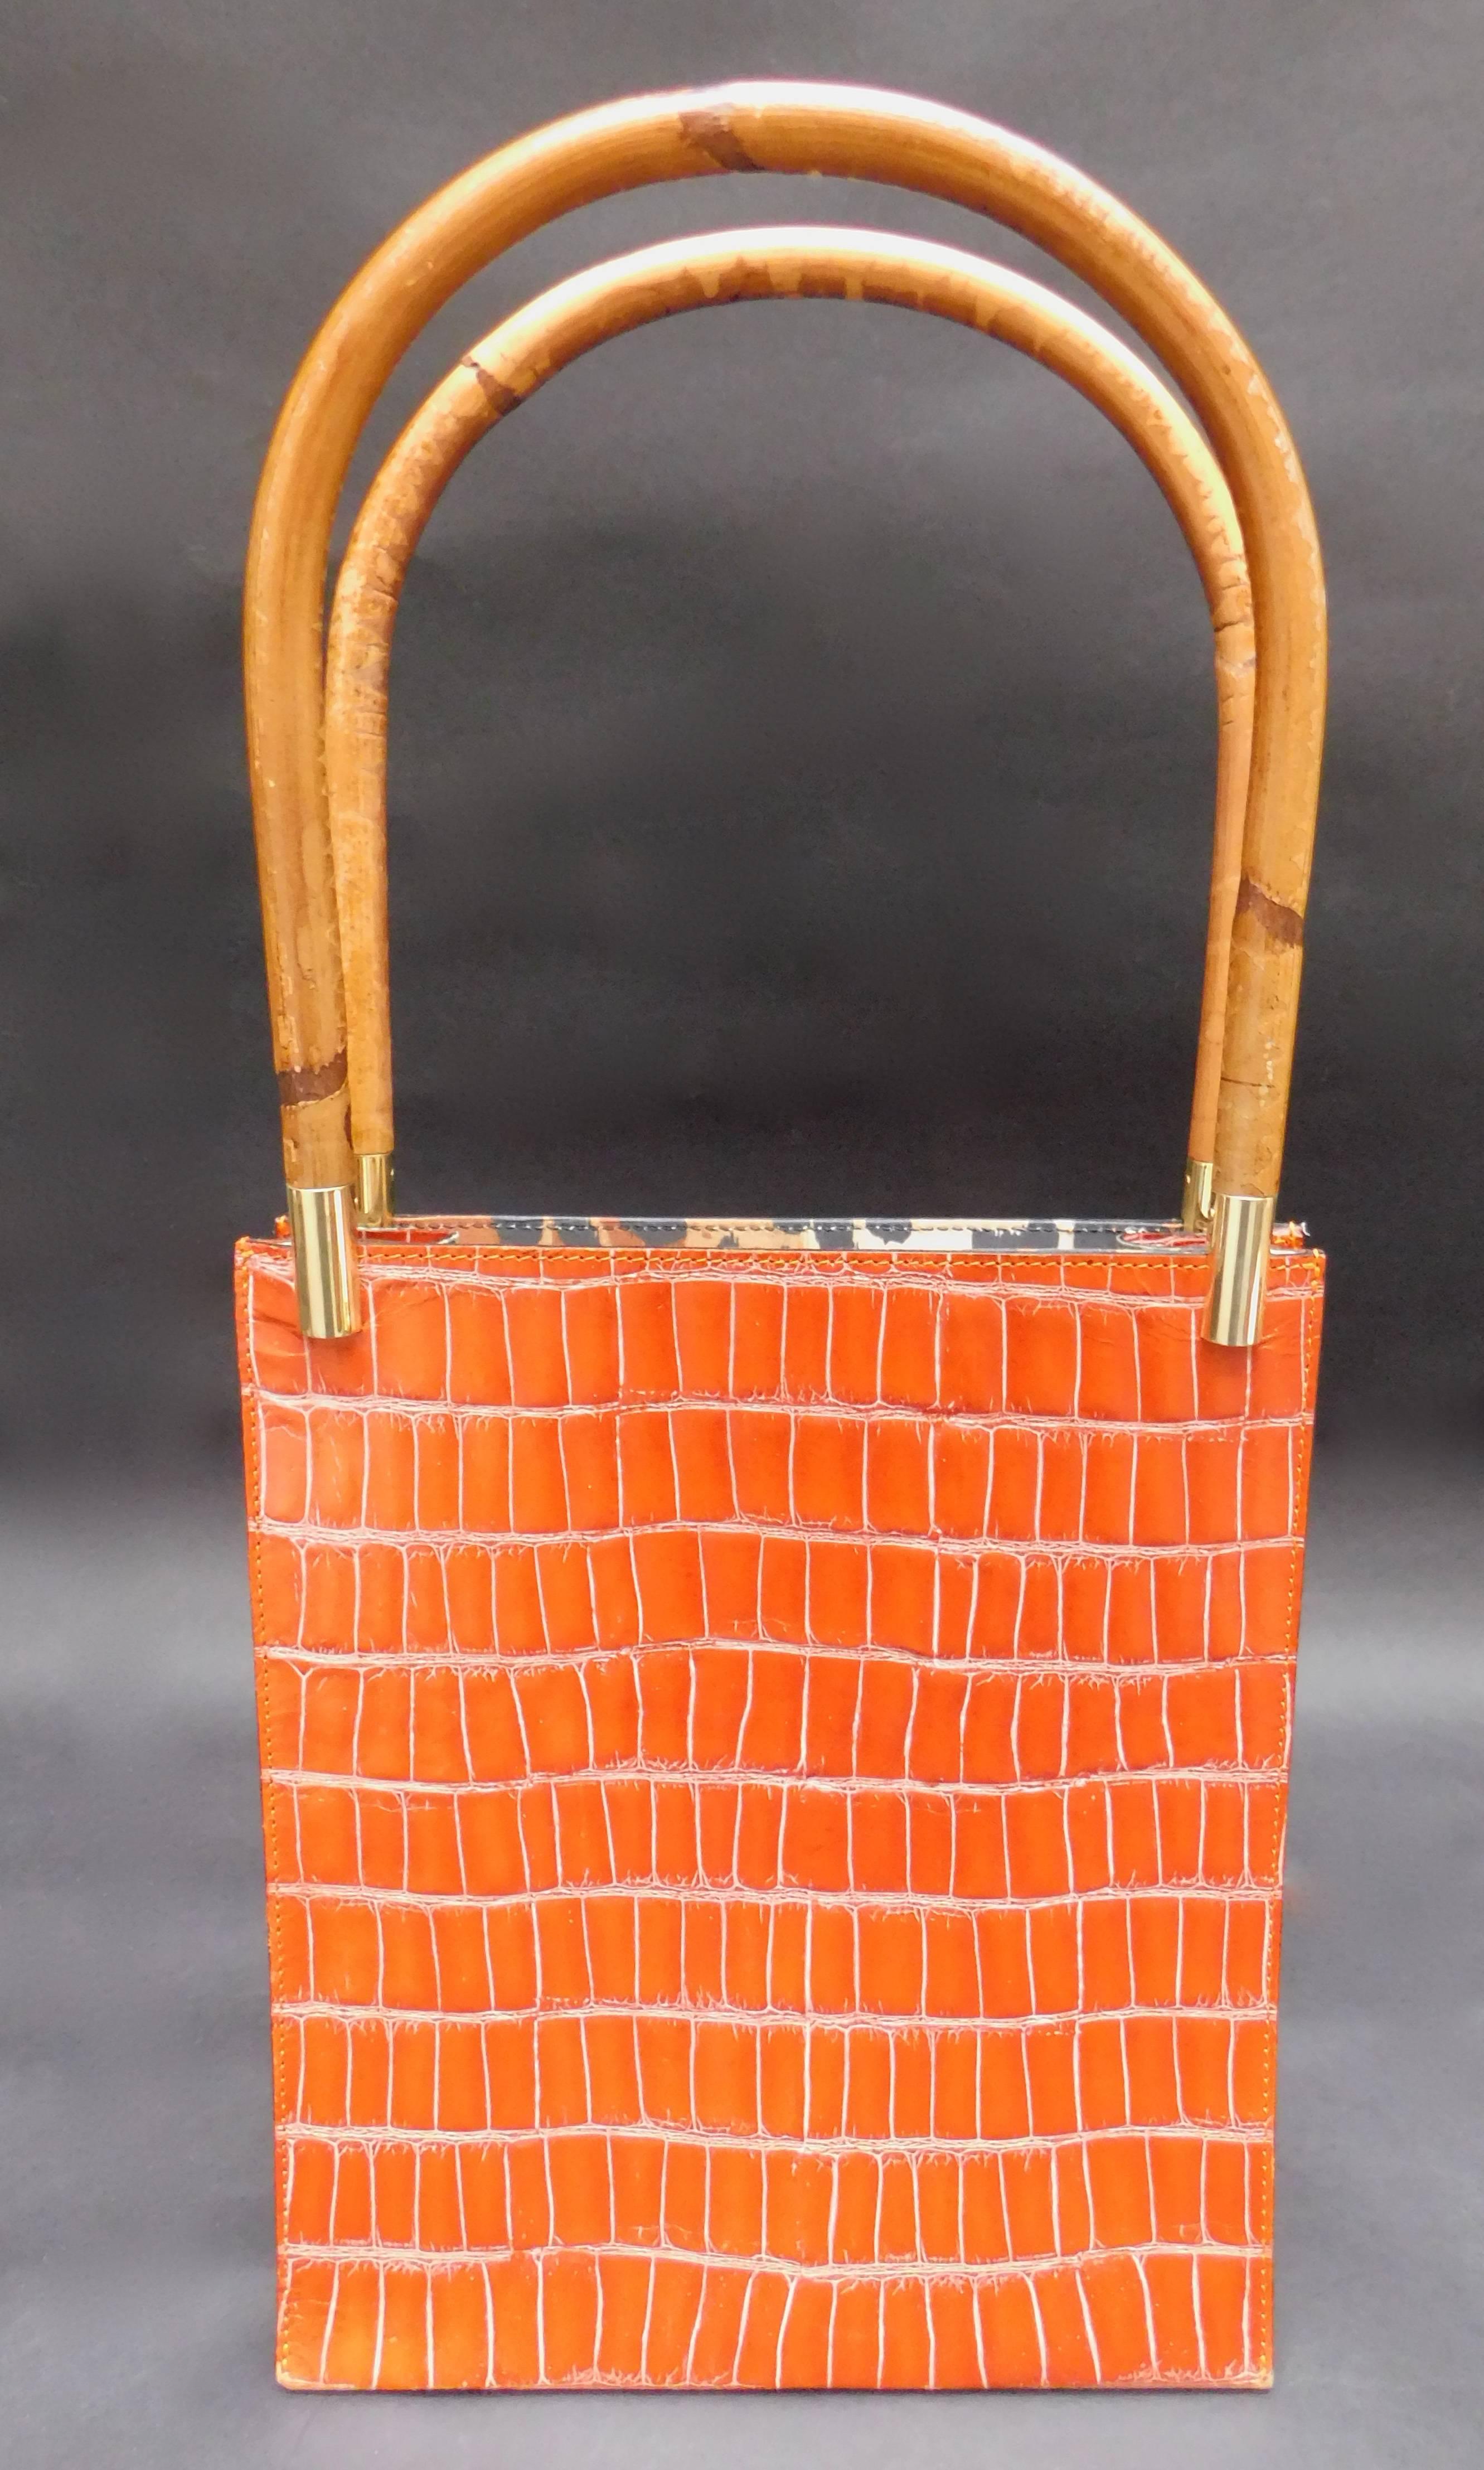 A 1980's Kenzo Orange embossed leather handbag with bamboo handles and gold accents. The interior is lined in leopard printed cotton with one zipper pocket and one leather open pocket. The handbag is in fantastic condition and the bamboo handles are